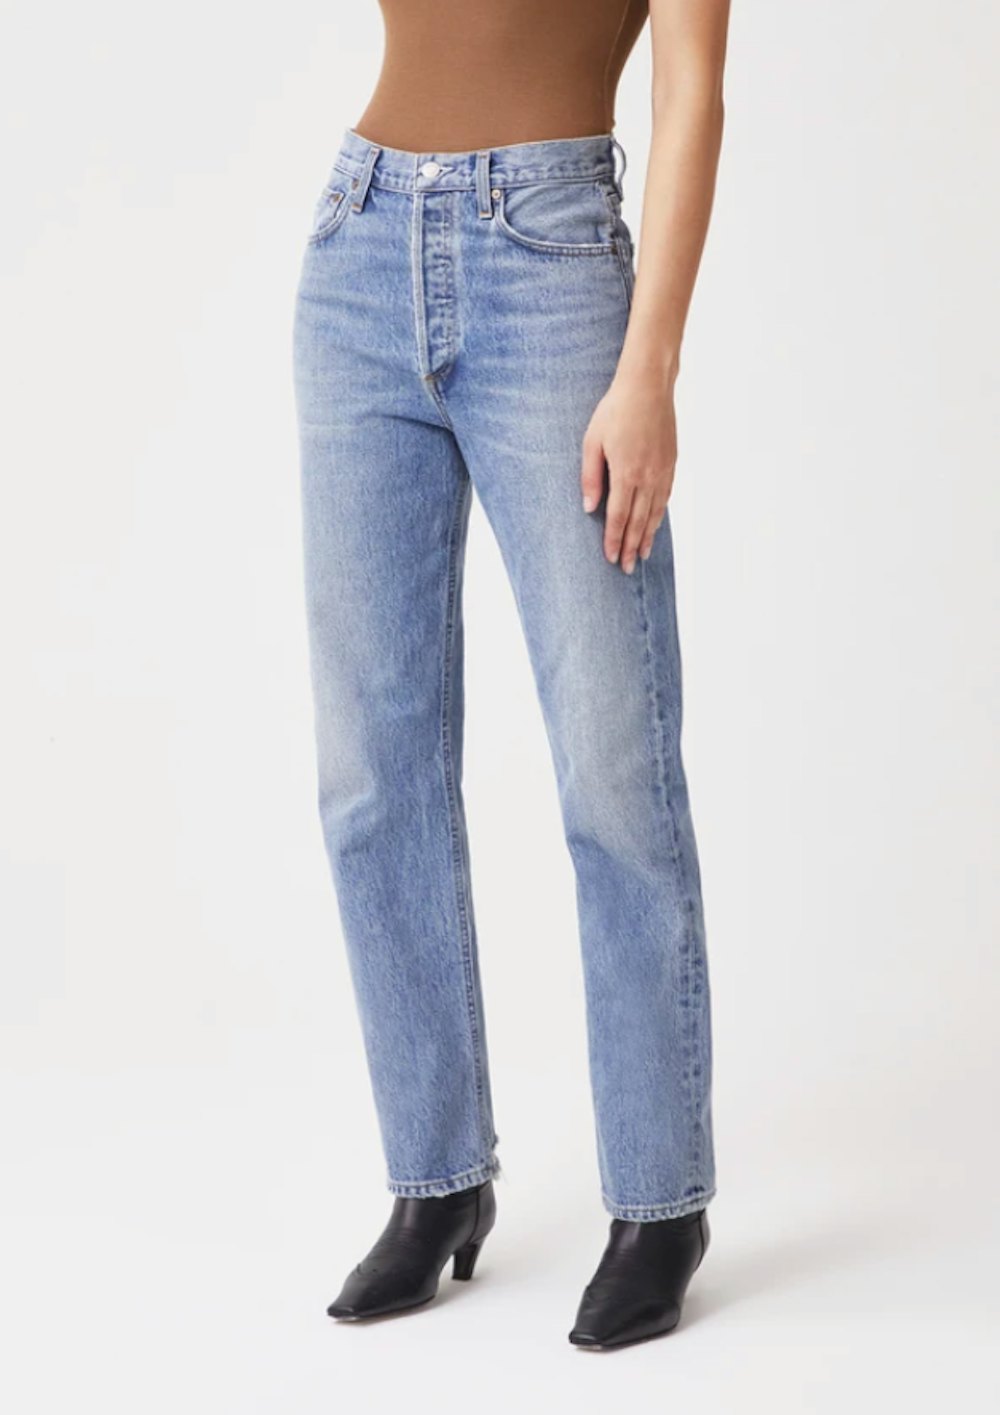 5 Fall Denim Trends To Shop Now, From Low-Rise To Dad Jeans